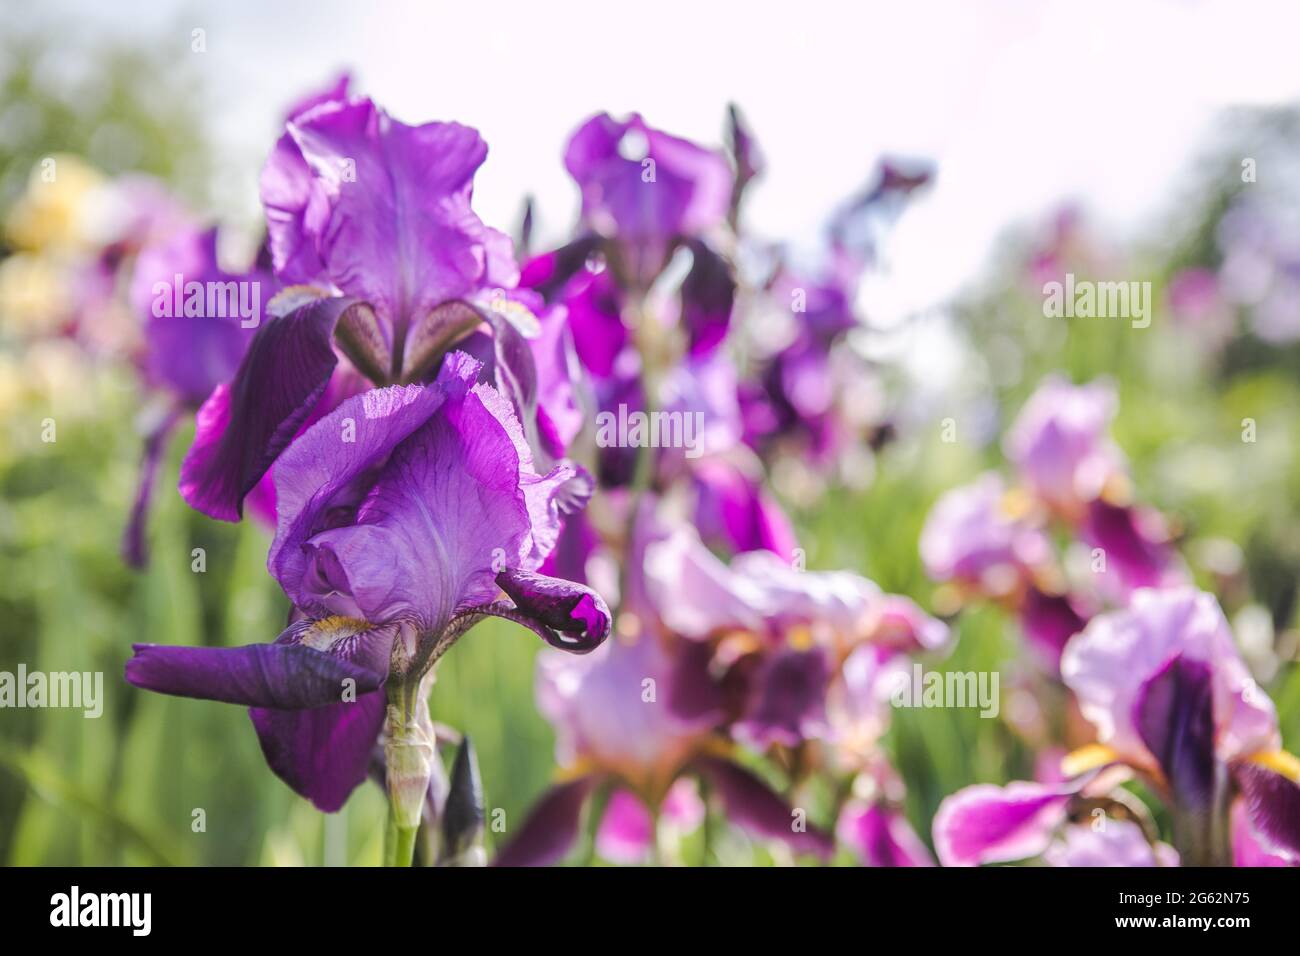 Germanica iris close-up in the garden. Atmospheric spring floral background. Solar banner with copy space. Delicate delicate irises flower beds and pa Stock Photo